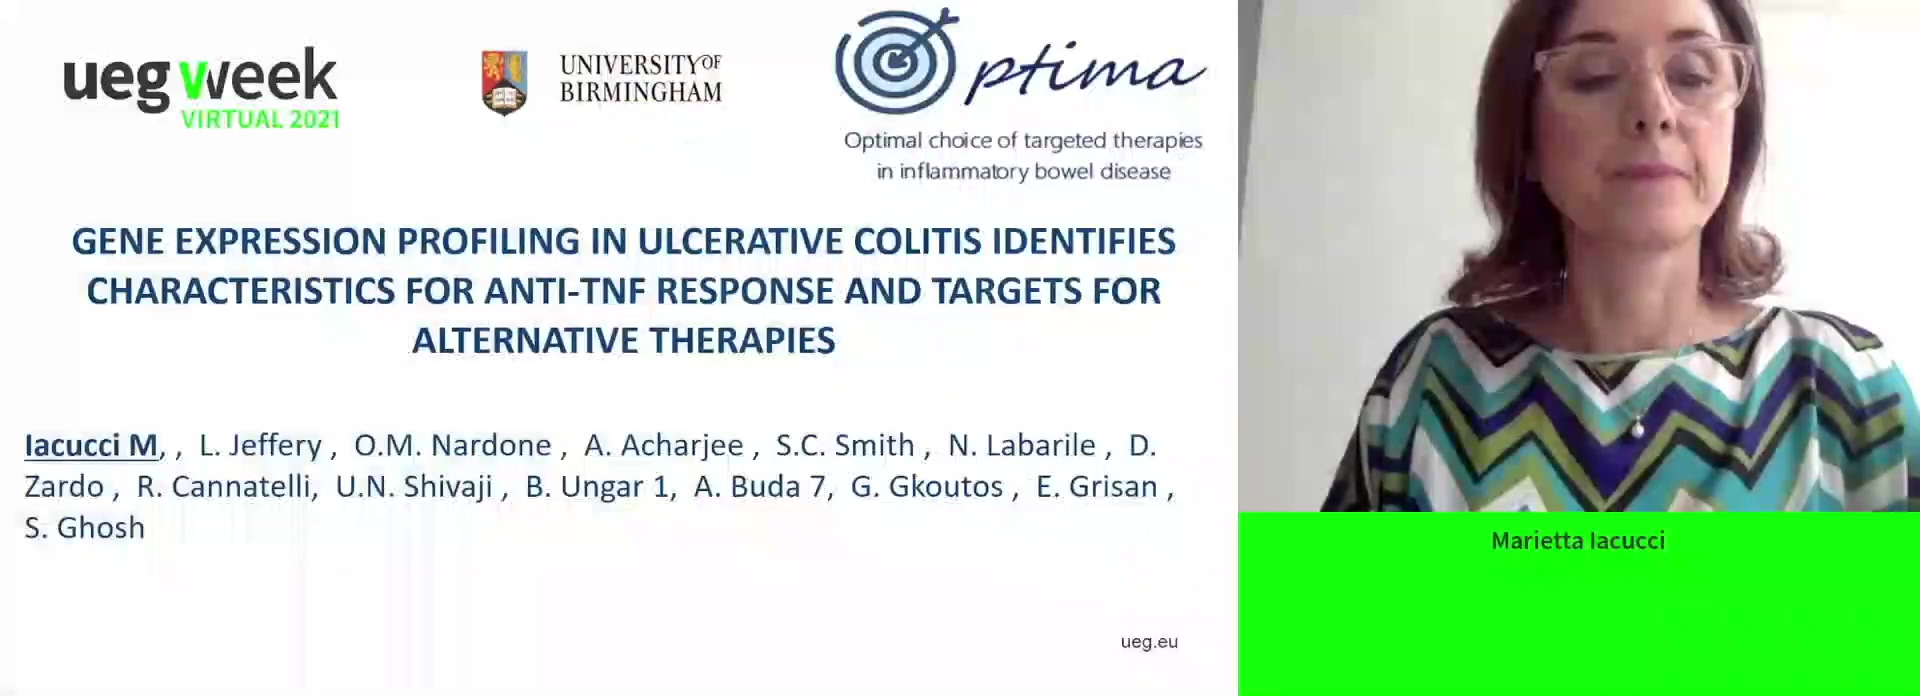 GENE EXPRESSION PROFILING IN ULCERATIVE COLITIS IDENTIFIES CHARACTERISTICS FOR ANTI-TNF RESPONSE AND TARGETS FOR ALTERNATIVE THERAPIES